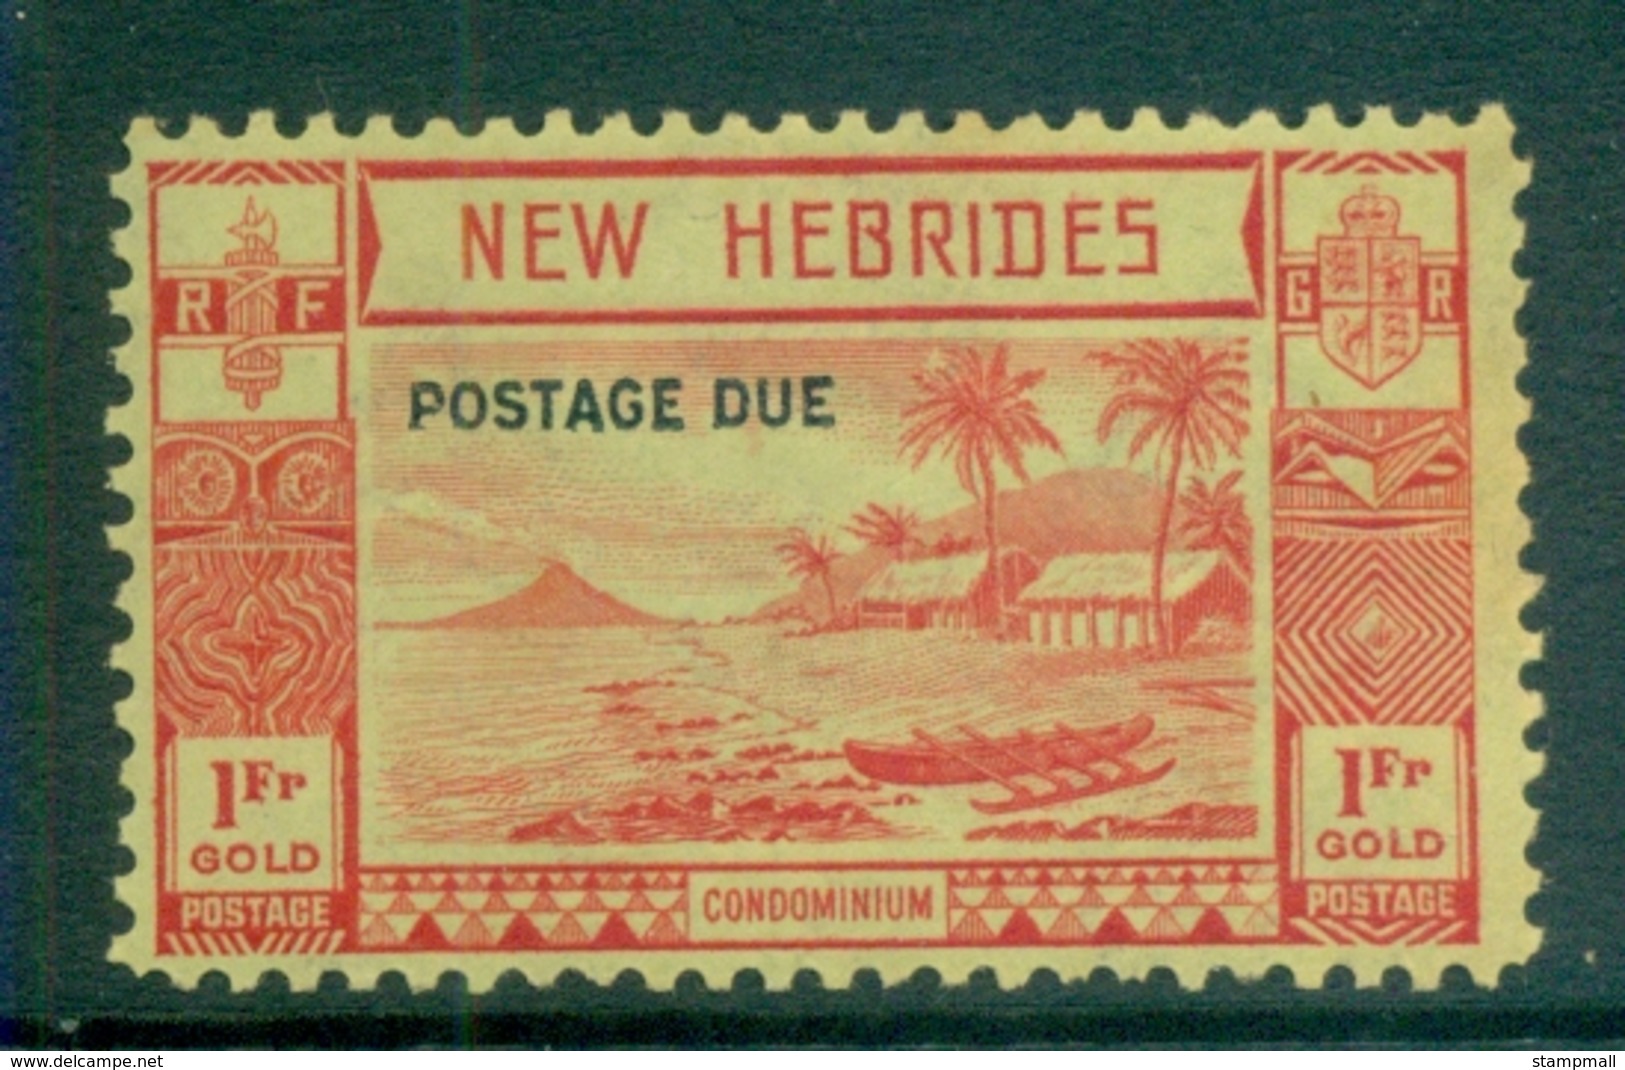 New Hebrides (Br) 1938 Postage Dues Opts 1fr (gum Tones) MUH - Used Stamps